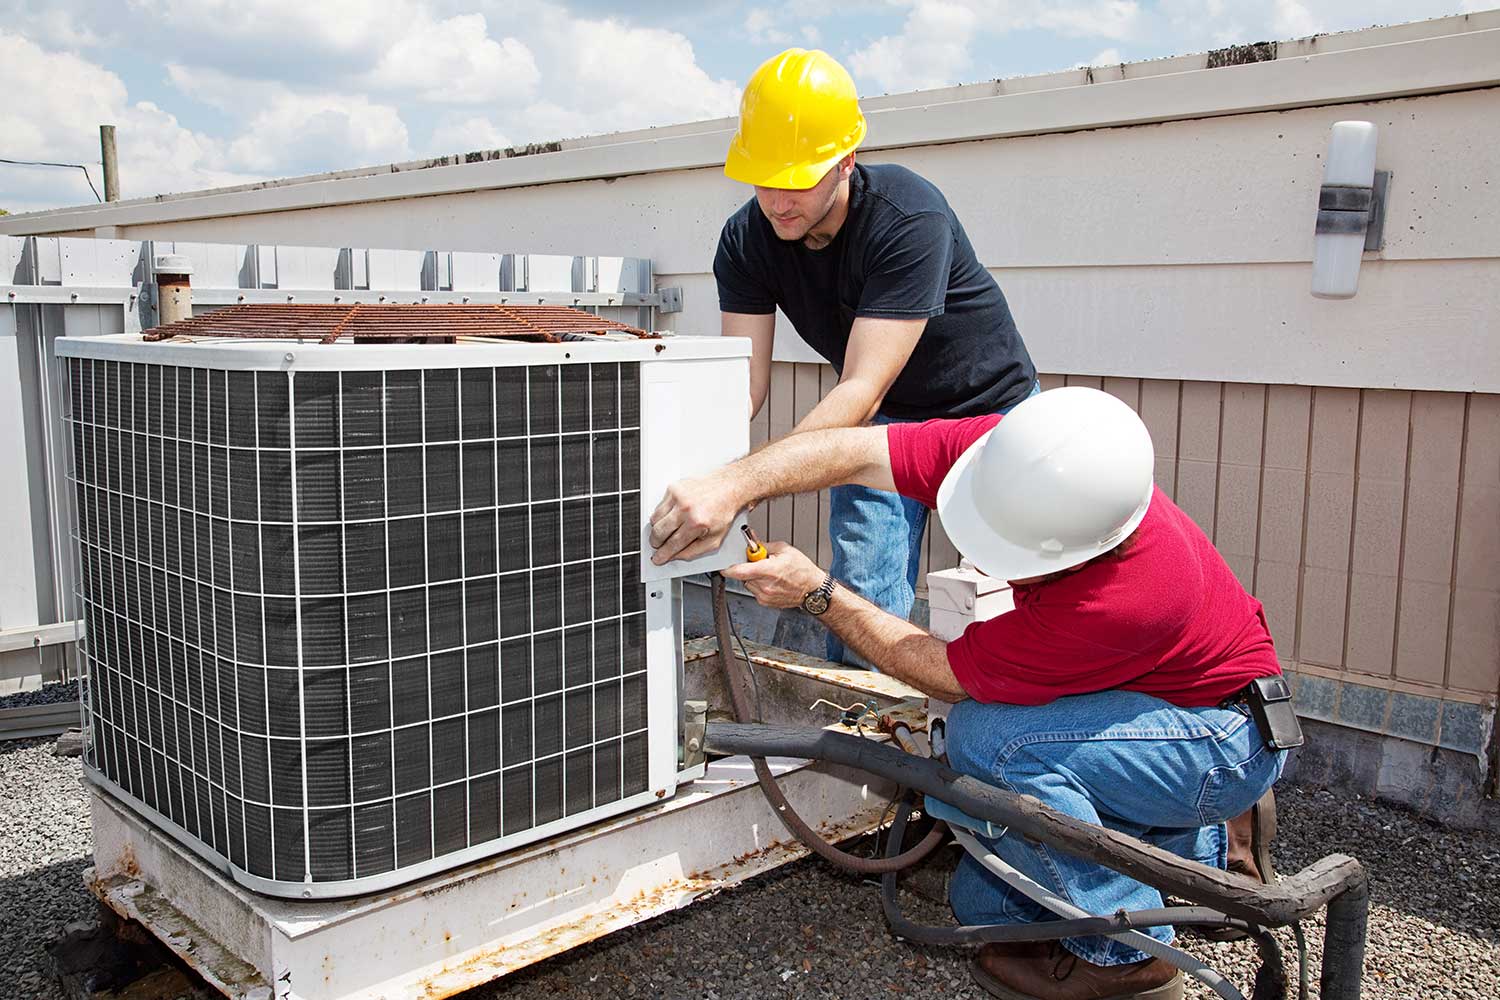 Heating, Ventilation as well as A/C savings add up